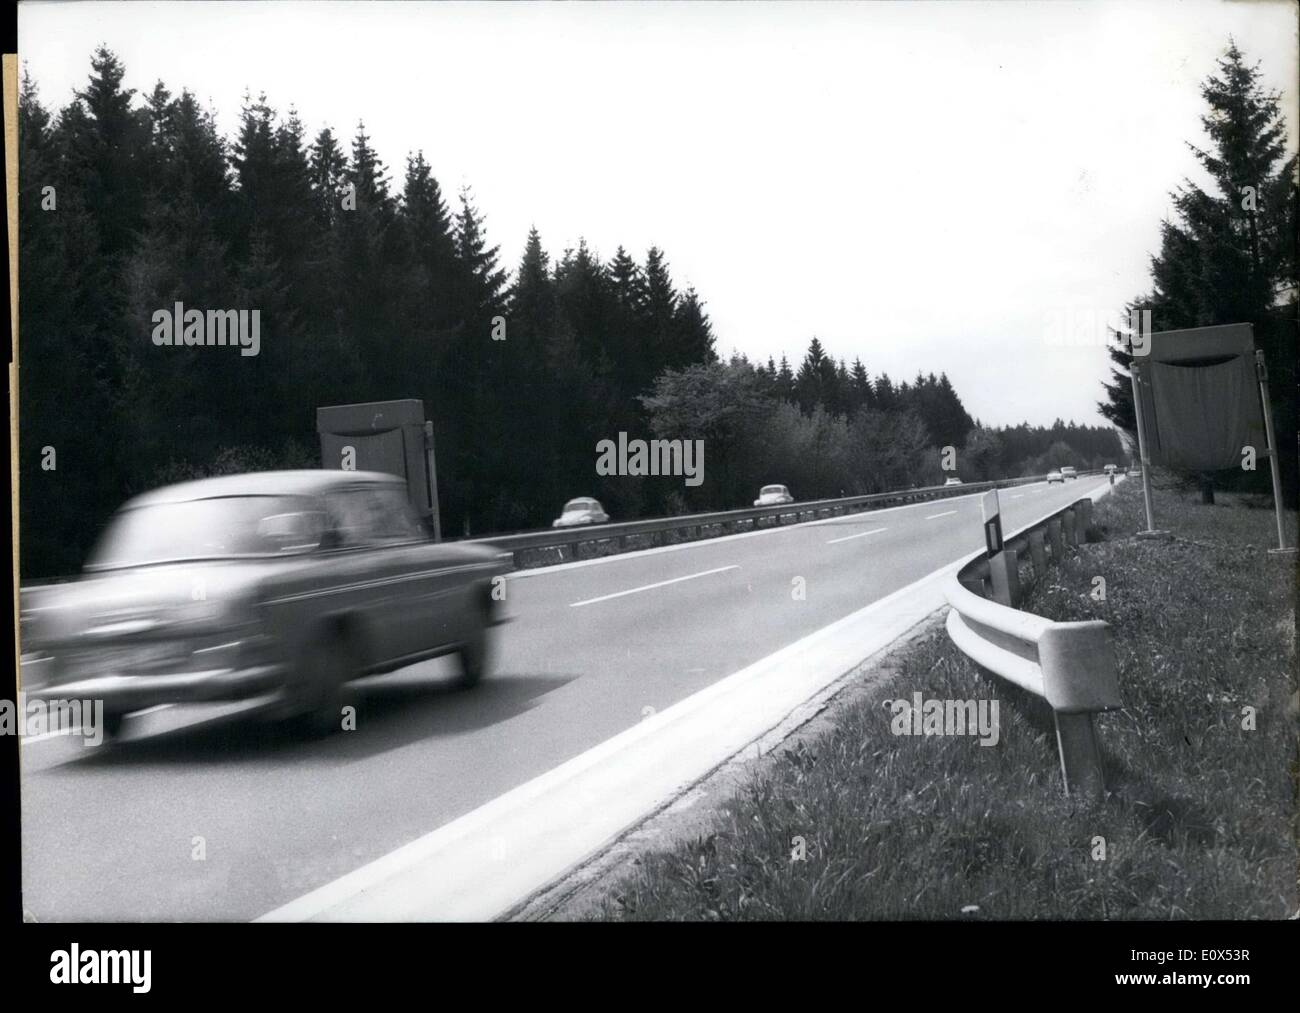 May 26, 1965 - The most modern, electronic traffic signs of Europe went up in Germany on the Autobahn between Salzburg and Munich. The signs were shown at the traffic exhibition in Munich. Every two kilometers these signs will be on the side of the road showing various important traffic information such as: speed limits, passing zones, and accidents. Pictured here are the future electronic signs before they went into use. Stock Photo